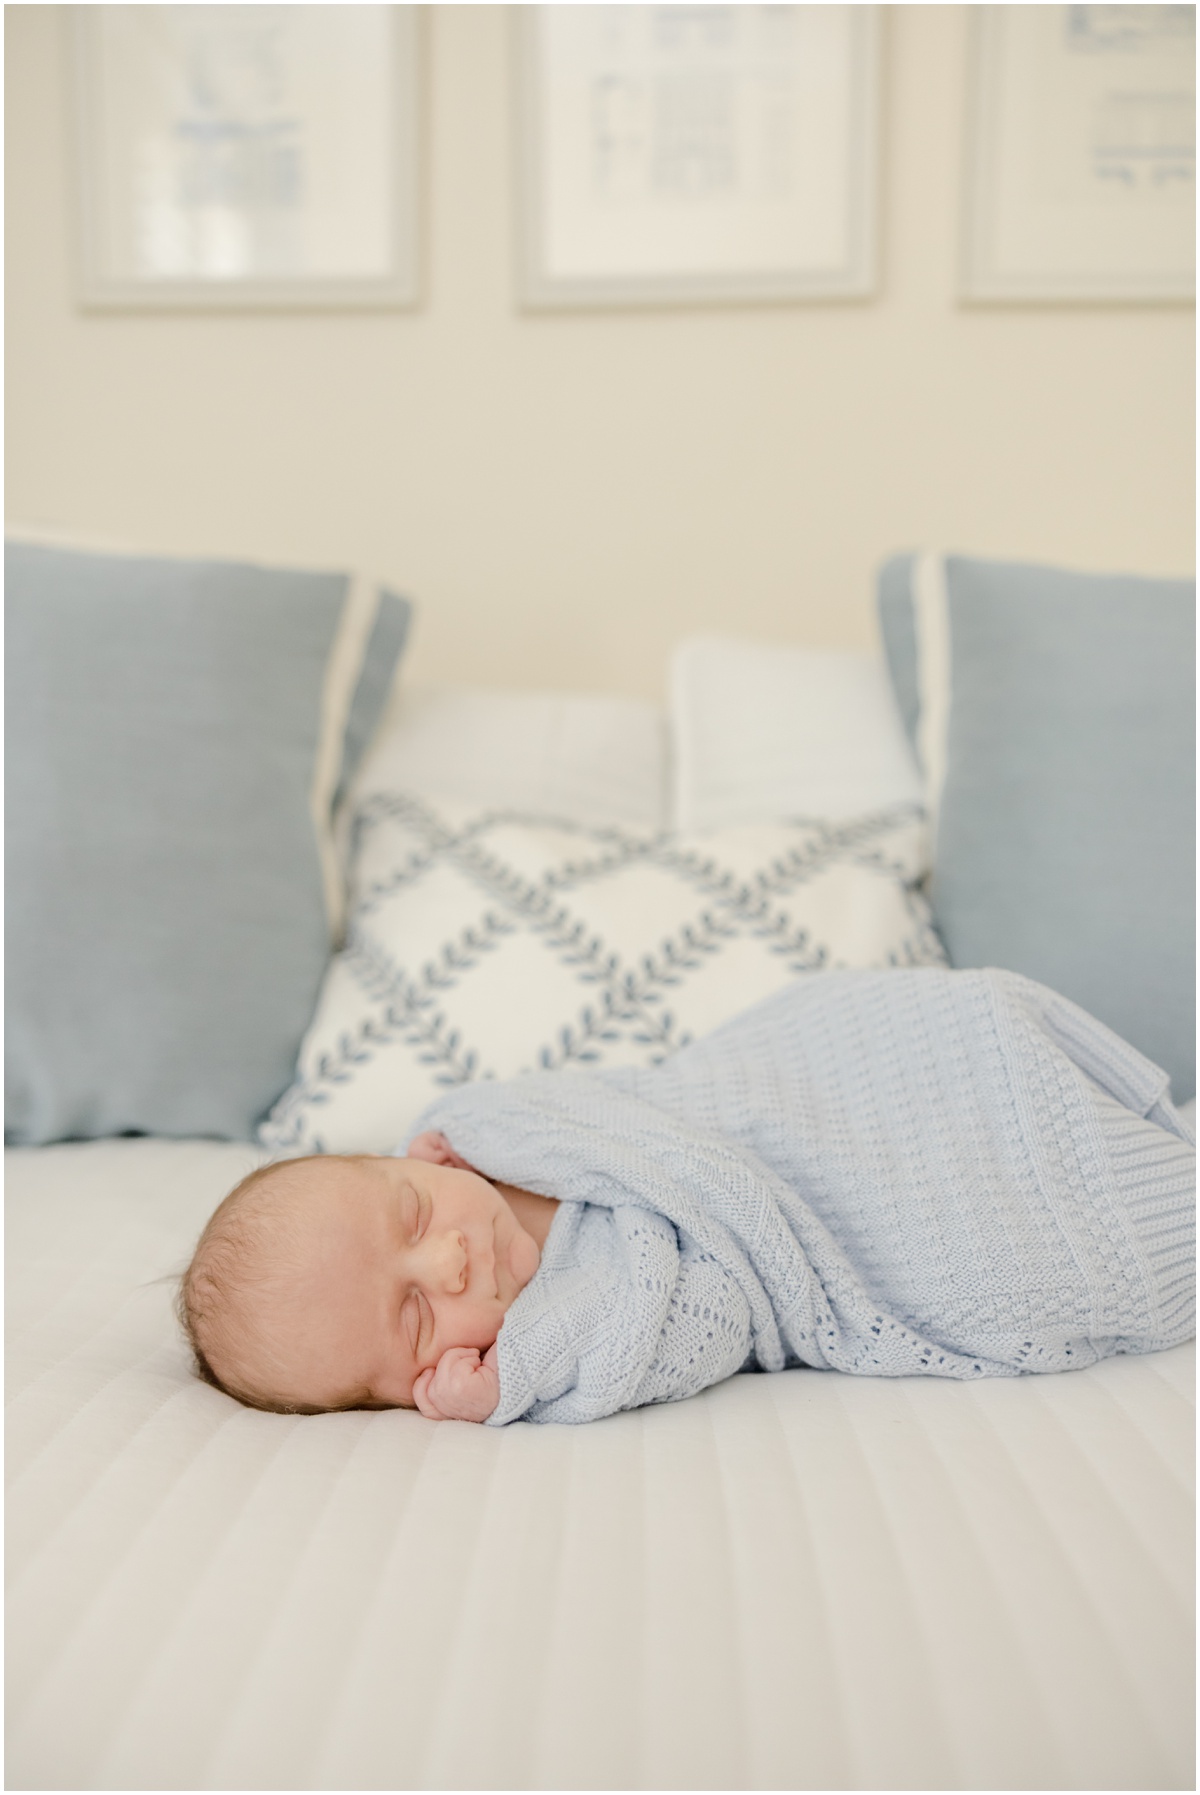 Greenville Newborn Photography if a baby boy in  blue blanket sleeping on a white bed.